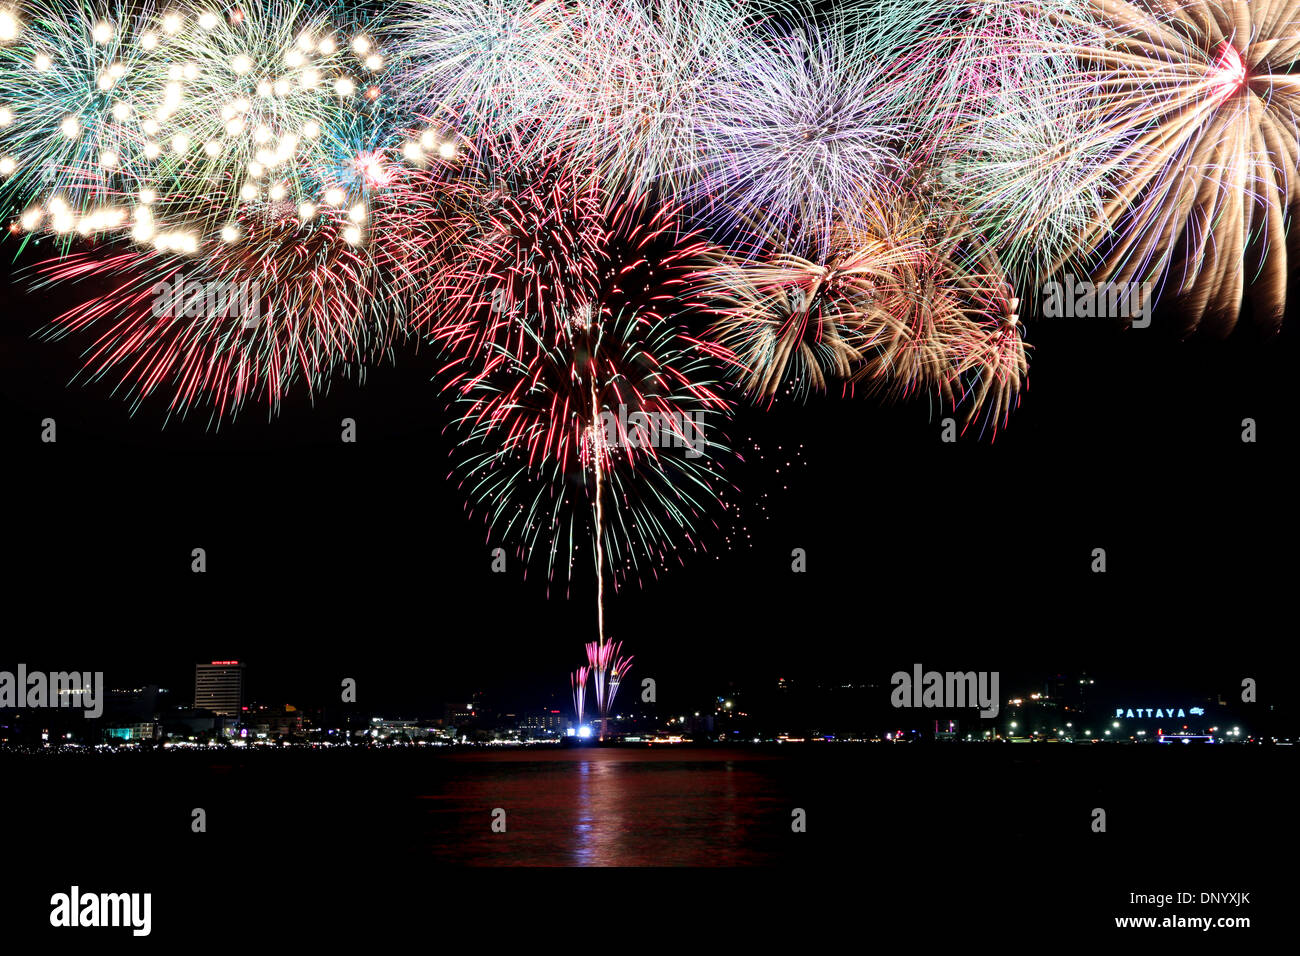 Variety of colors Fireworks or firecracker in the darkness at Pattaya,Thailand. Stock Photo